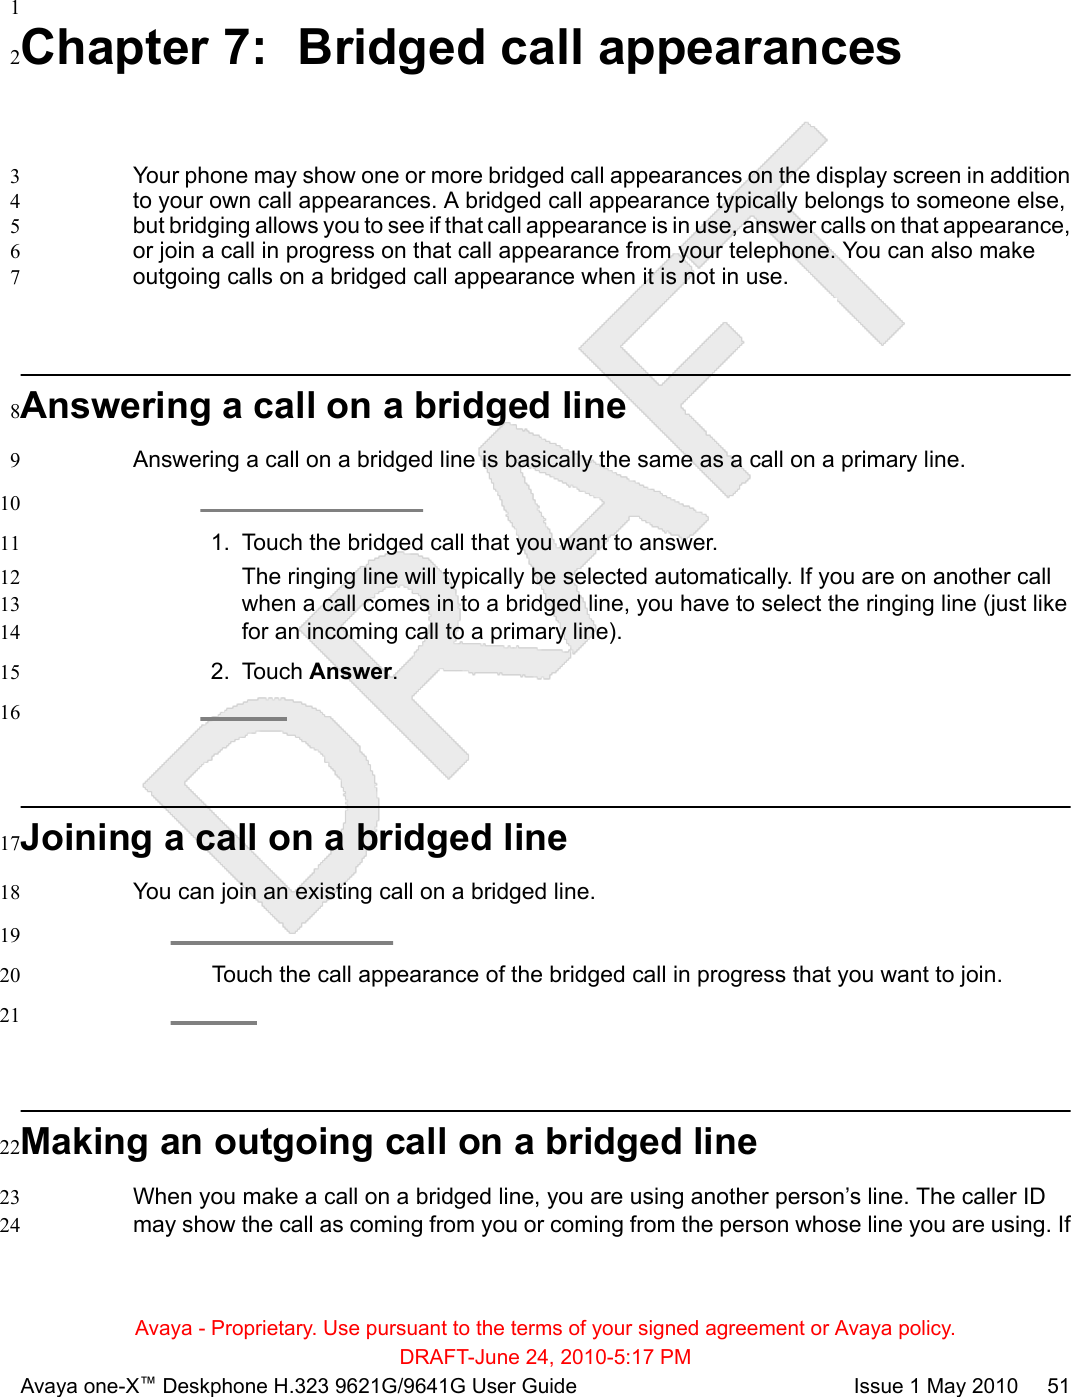 1Chapter 7:  Bridged call appearances2Your phone may show one or more bridged call appearances on the display screen in addition3to your own call appearances. A bridged call appearance typically belongs to someone else,4but bridging allows you to see if that call appearance is in use, answer calls on that appearance,5or join a call in progress on that call appearance from your telephone. You can also make6outgoing calls on a bridged call appearance when it is not in use.7Answering a call on a bridged line8Answering a call on a bridged line is basically the same as a call on a primary line.9101. Touch the bridged call that you want to answer.11The ringing line will typically be selected automatically. If you are on another call12when a call comes in to a bridged line, you have to select the ringing line (just like13for an incoming call to a primary line).142. Touch Answer.1516Joining a call on a bridged line17You can join an existing call on a bridged line.1819Touch the call appearance of the bridged call in progress that you want to join.2021Making an outgoing call on a bridged line22When you make a call on a bridged line, you are using another person’s line. The caller ID23may show the call as coming from you or coming from the person whose line you are using. If24Avaya - Proprietary. Use pursuant to the terms of your signed agreement or Avaya policy.DRAFT-June 24, 2010-5:17 PMAvaya one-X™ Deskphone H.323 9621G/9641G User Guide Issue 1 May 2010     51